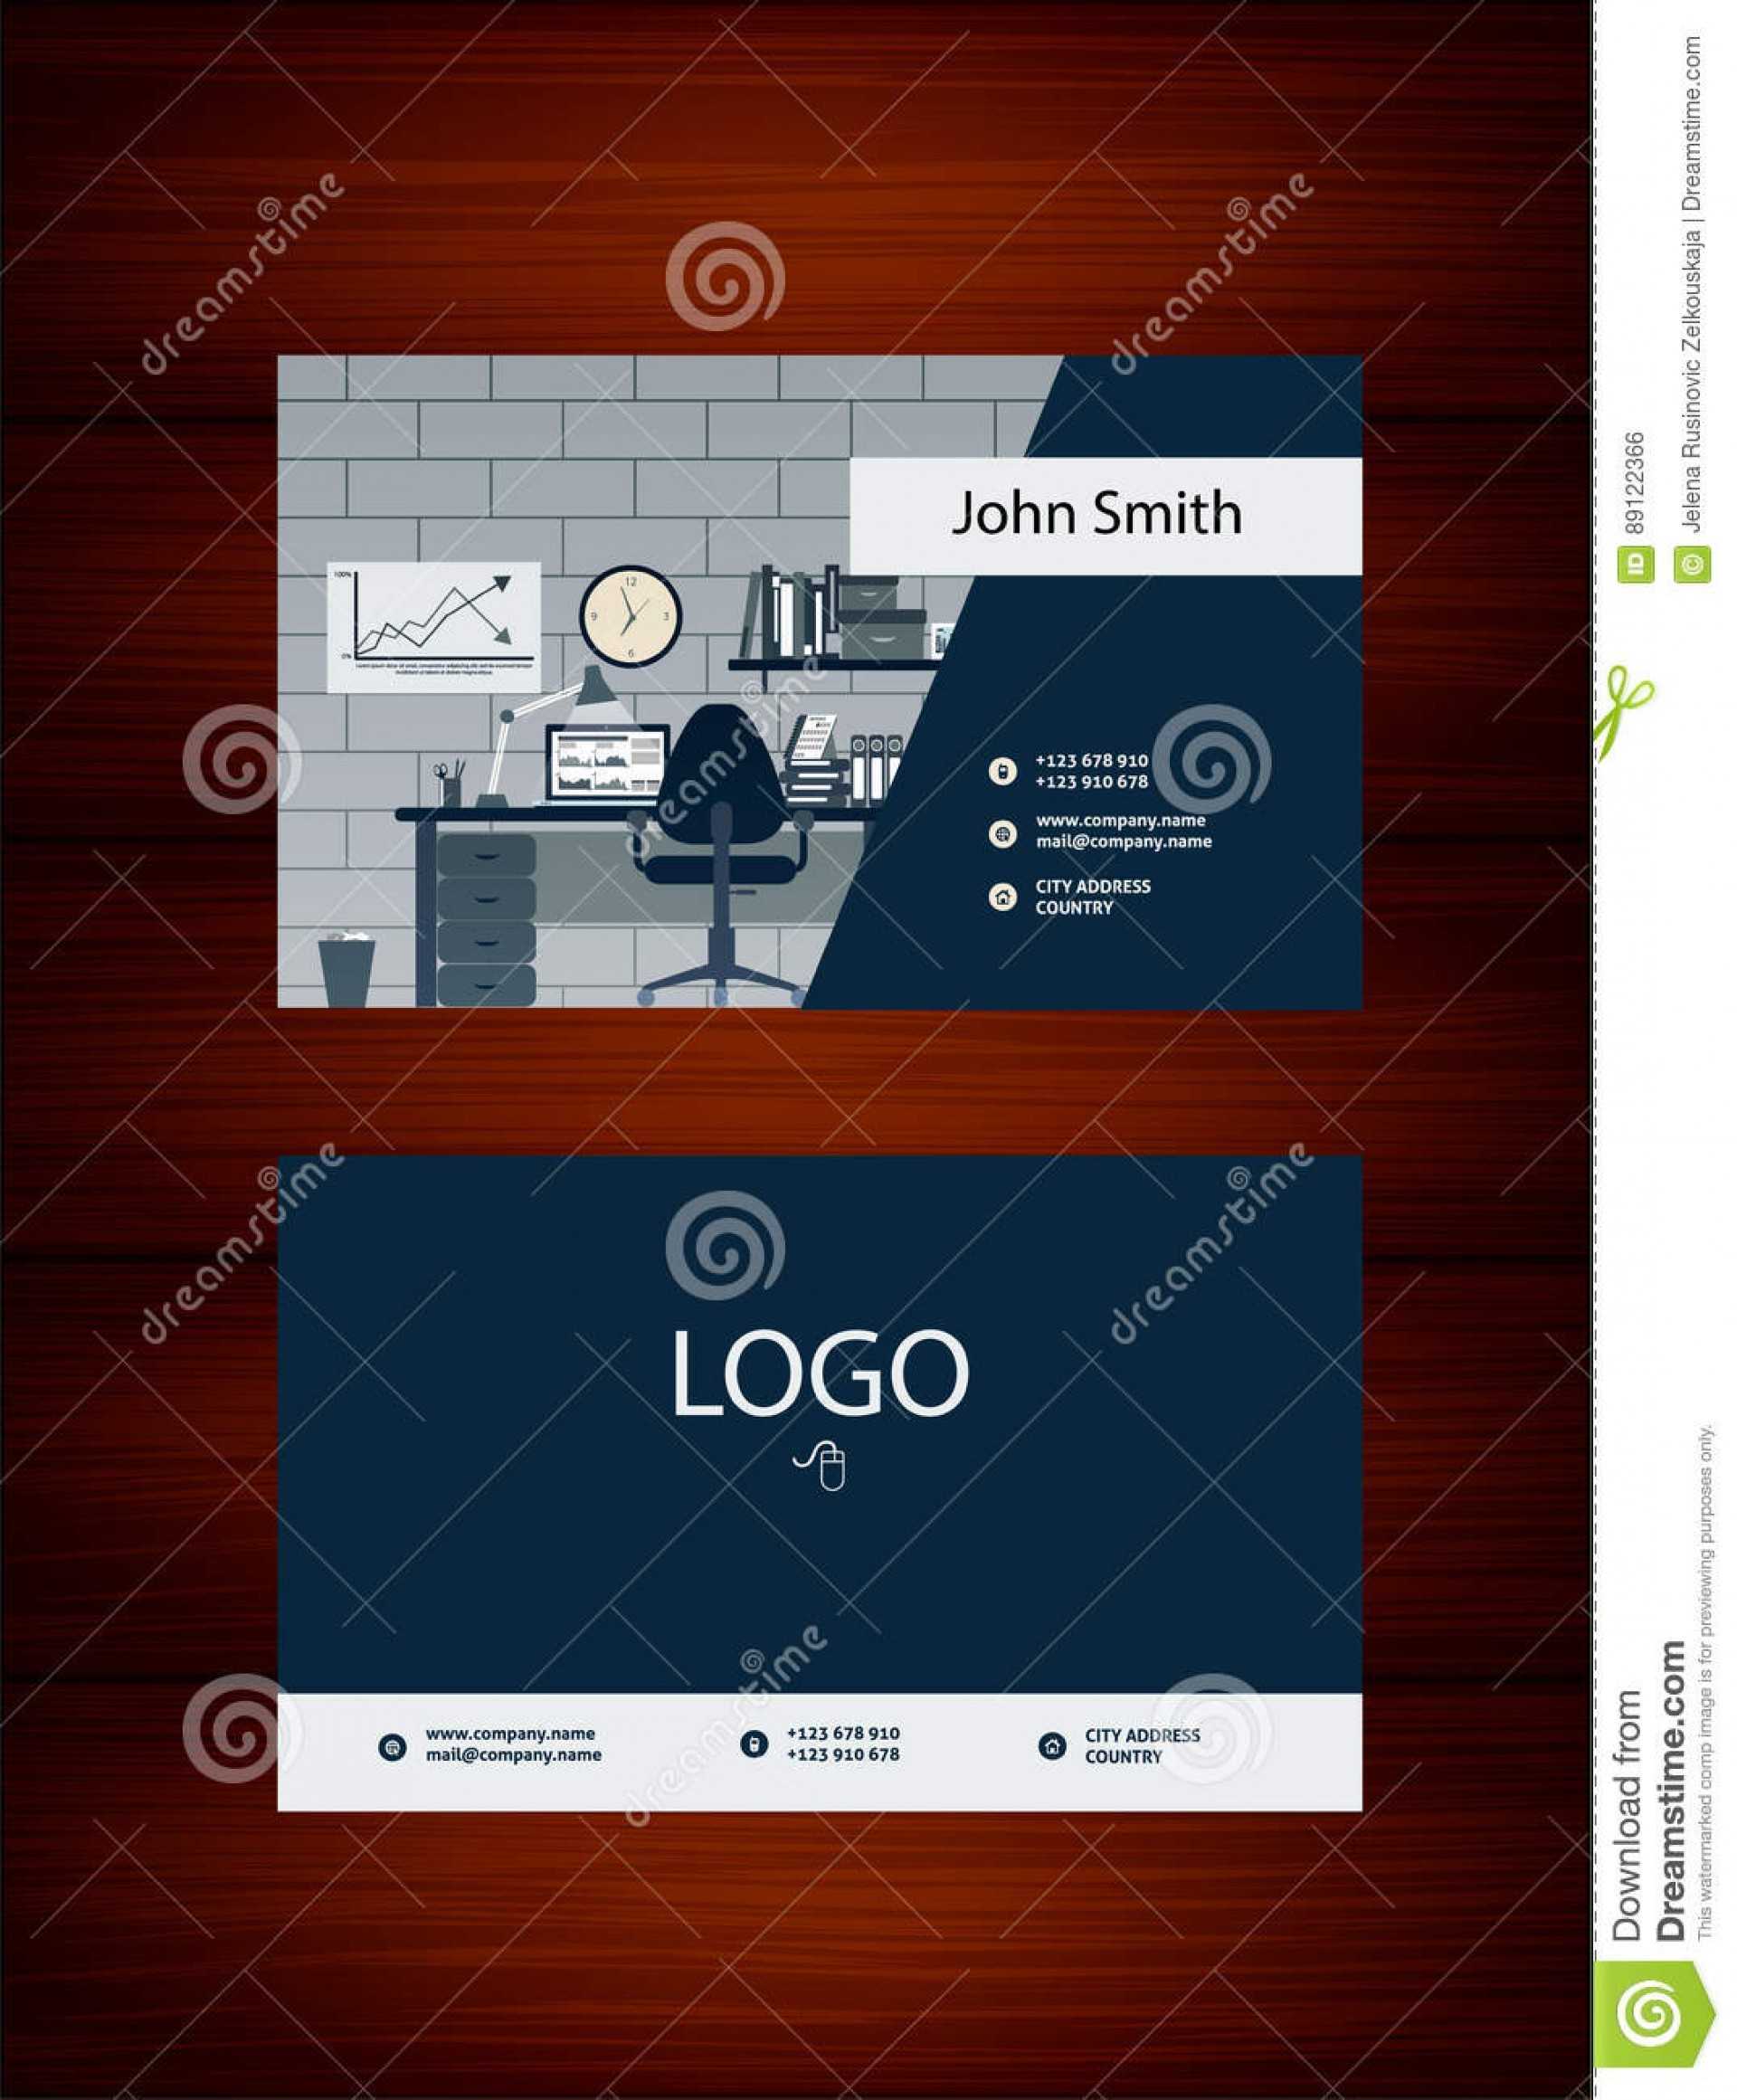 036 Office Business Card Template Ideas Phenomenal Open 8371 Within Office Max Business Card Template